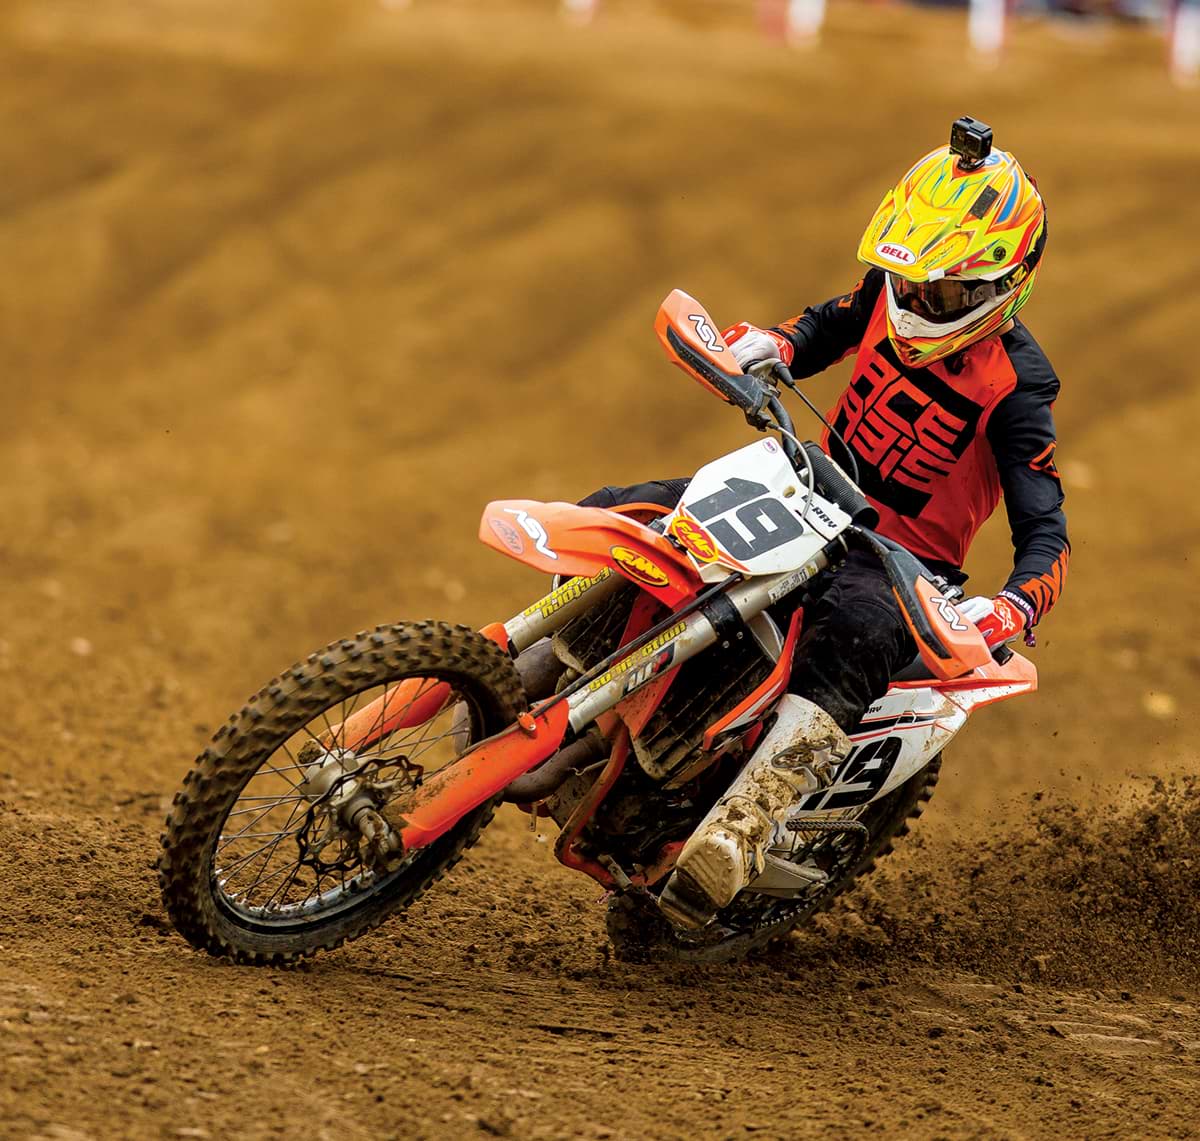 Young standouts in the early 125 All Star races